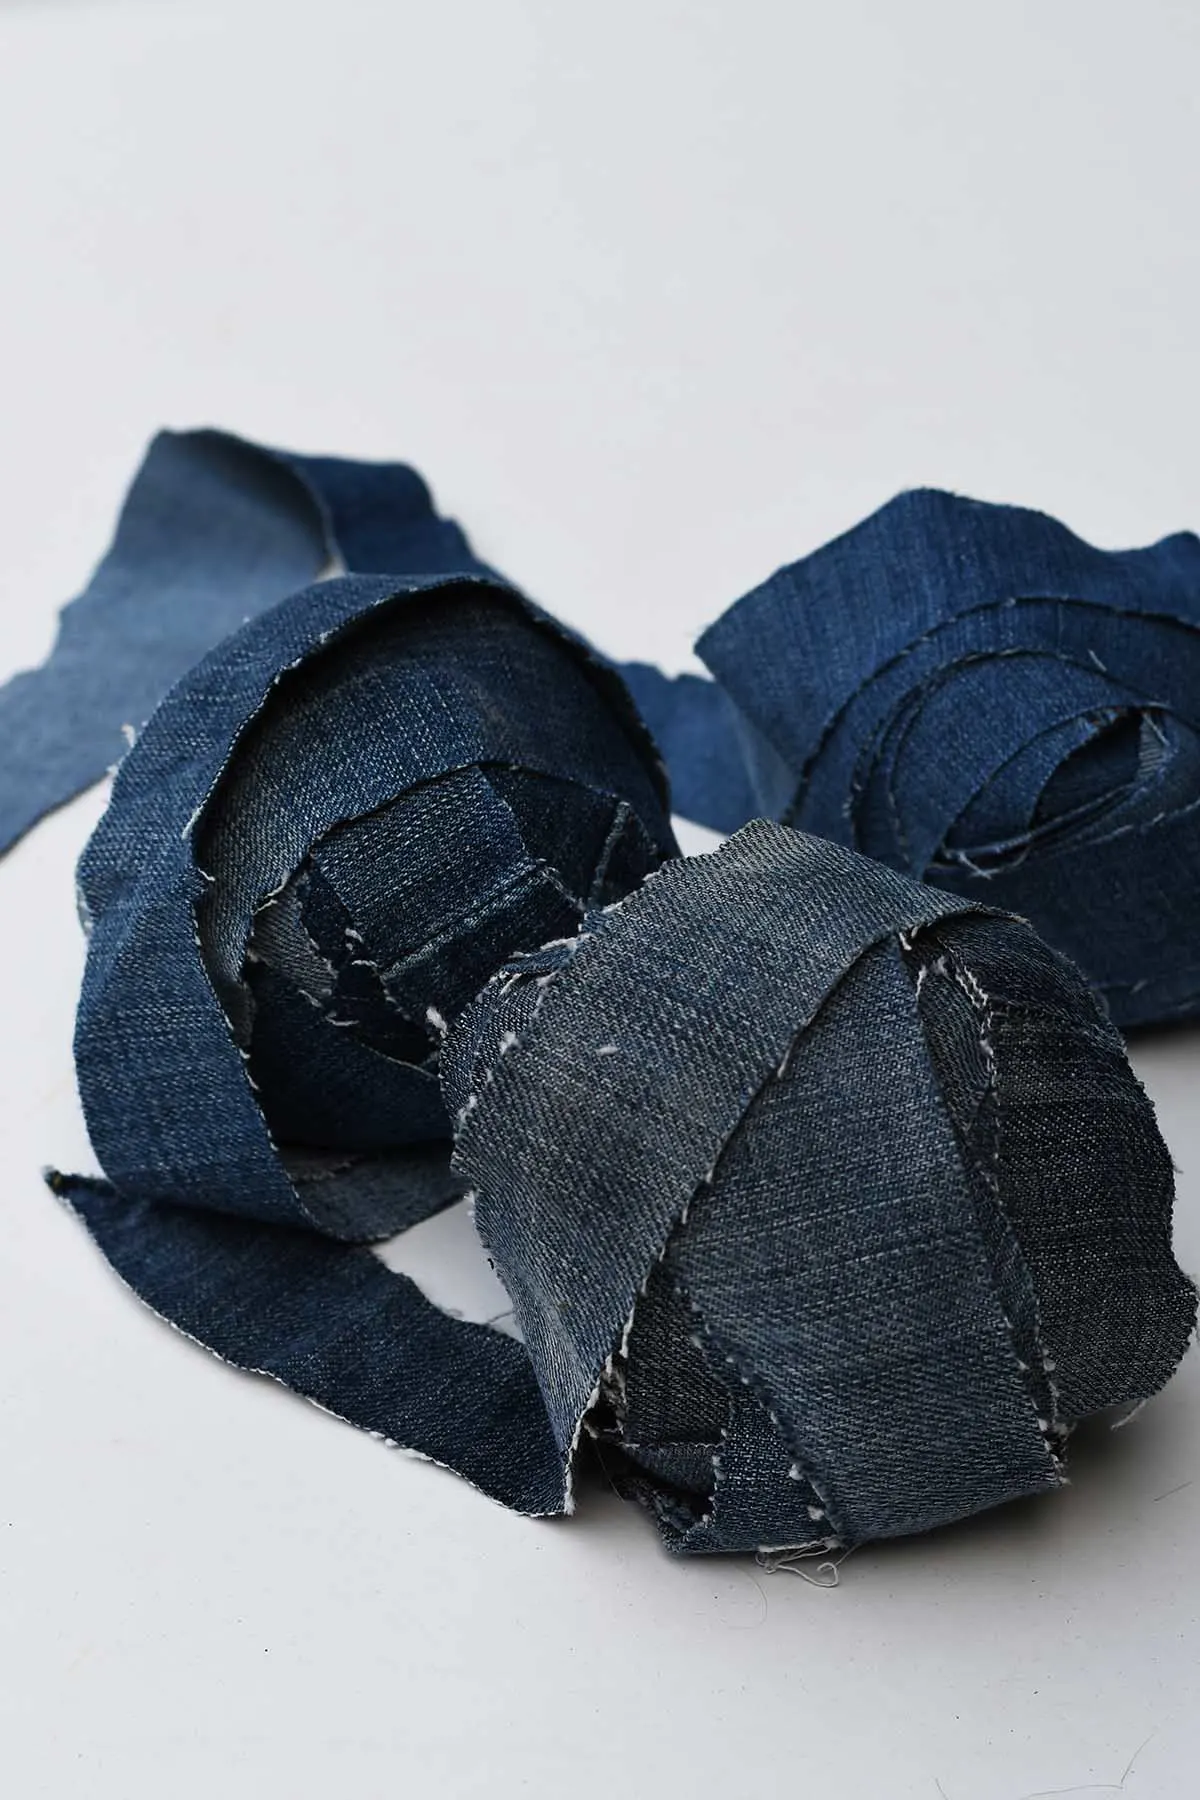 Upcycled denim yarn balls made from repurposed jeans